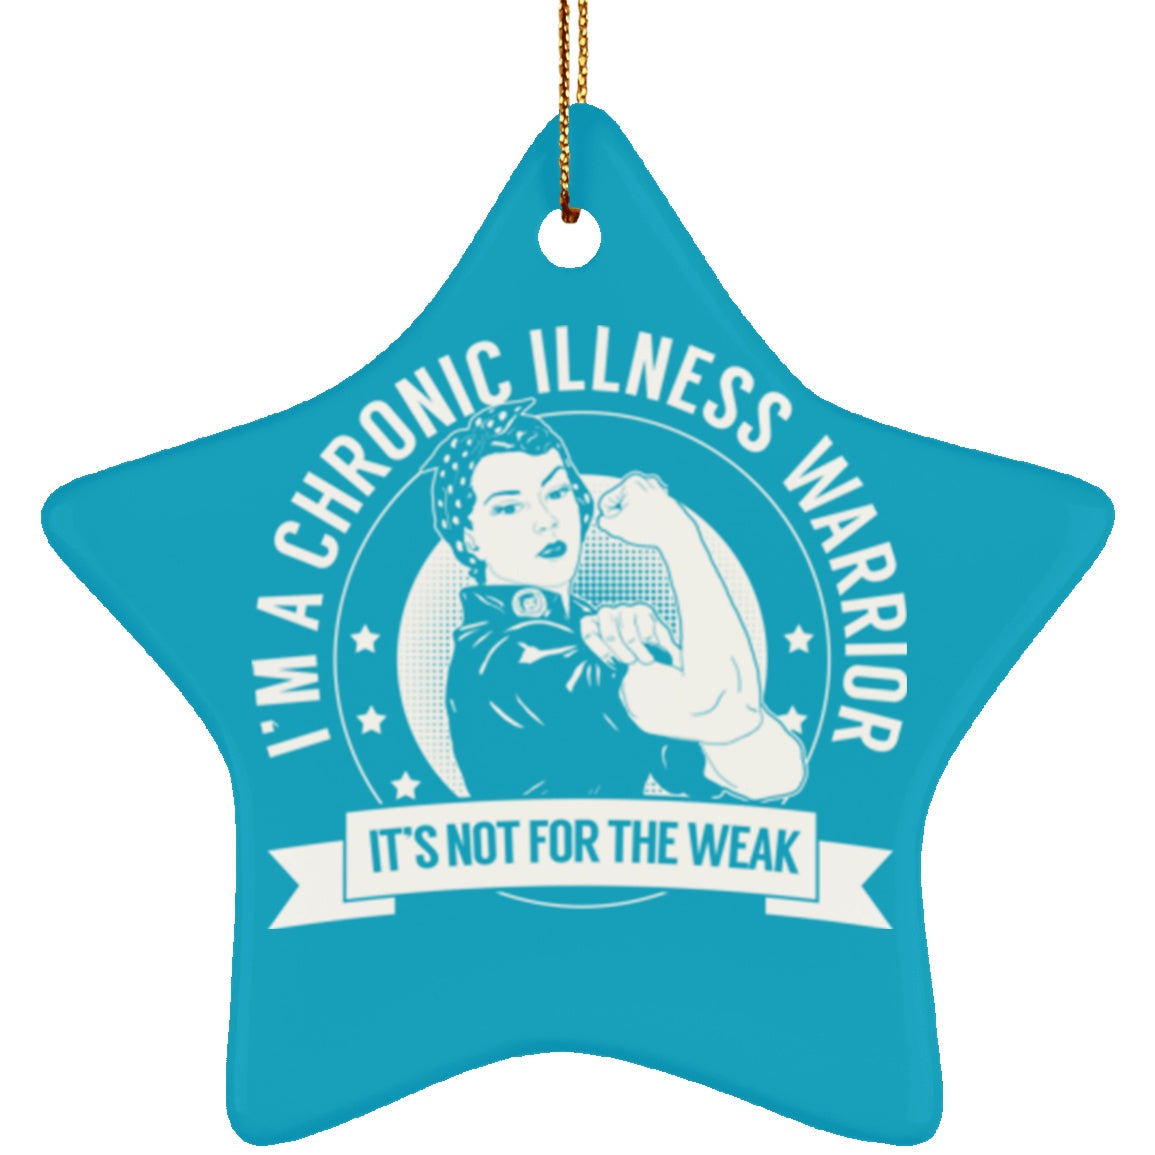 Chronic Illness Warrior Not For The Weak Star Ornament - The Unchargeables